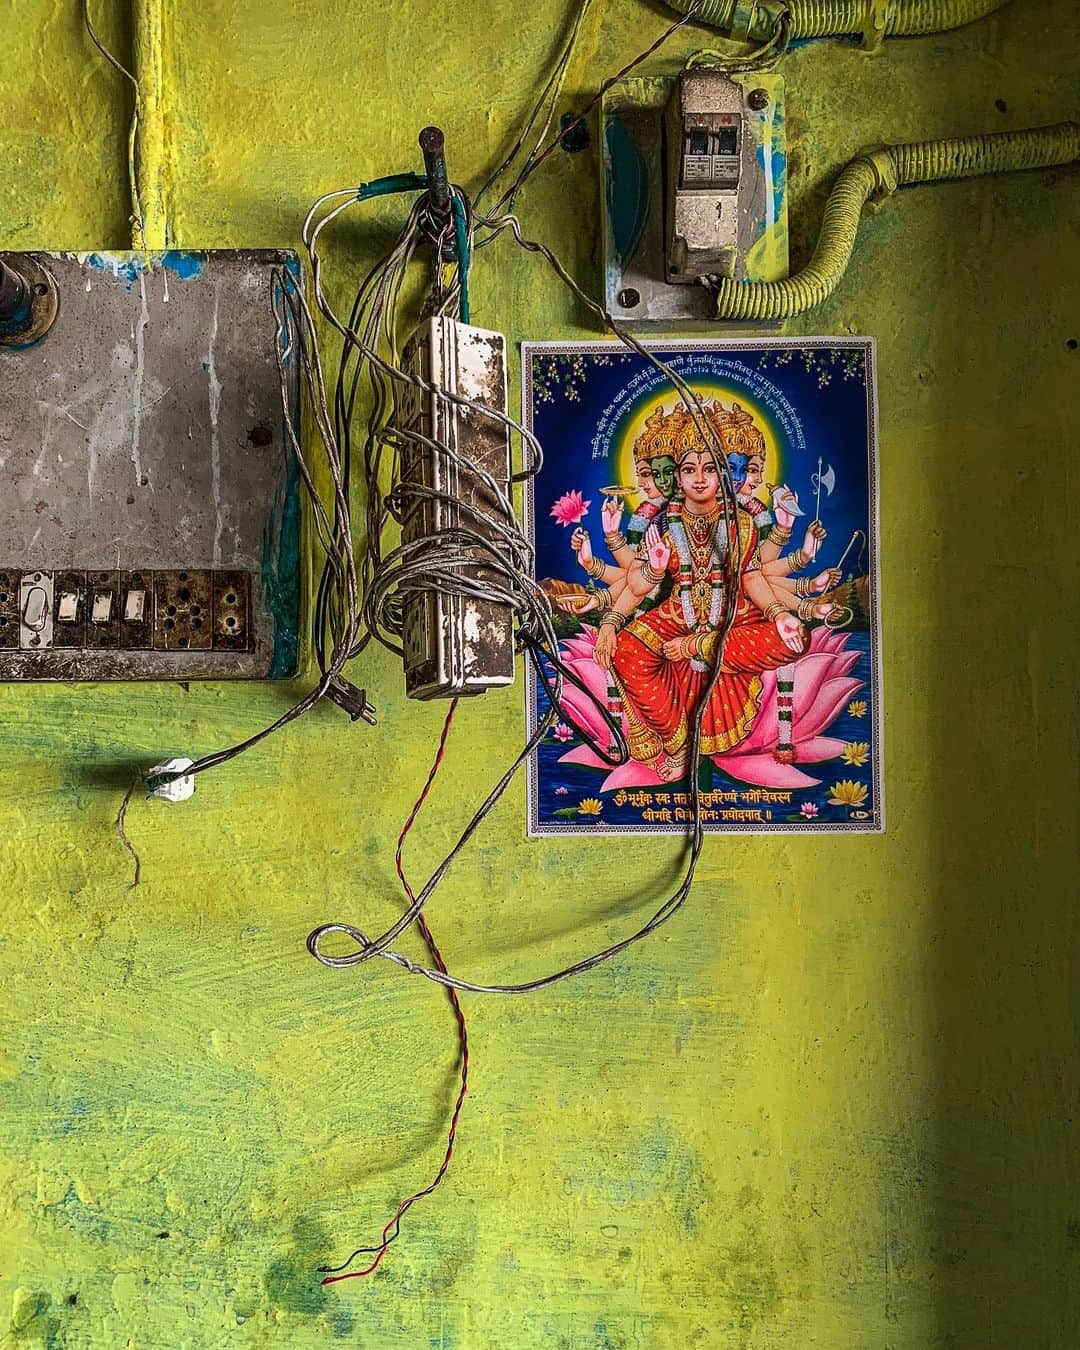 ジョン・スタンメイヤーさんのインスタグラム写真 - (ジョン・スタンメイヤーInstagram)「Around and within all the confusion of India. All the mind-boggling astonishingness. Everywhere you will find electrical spaghetti. All over is the chaos theory of electrical dynamics. Still, in each hotel and dhaba where I saw spaghetti, everything worked! Maybe it helps when Goddess Gayatri Devi oversees a tangled power strip and switch box at a hotel I slept at in Seondha in Madhya Pradesh. No gods or goddesses protected a bursting box with flavorful colored tagliatelle at another hotel in Bhagalpur, Bihar, and still, all the lights worked just fine. It takes patriotism to keep the power flowing and listing switch box from bursting into flames at a dhaba we had dal for breakfast, walking distance from the hotel in Bhagalpur. These days, the real chaos is us. How no one is paying attention to the war in the #Caucasus #NagornoKarabakh. We're still doing almost nothing about our environment. Too many people are more fascinated with a fly landing on the head of Whose Name I will not mention, accepting tangled lies and deceit in politics. And Us vs. Them is spreading. Now please… don't ever say beautiful India is backward when in truth, our entire human society is more messed up than any circuitry in all of South Asia. Sitting tonight on #thepurpleporch, making triptychs, missing Indian pasta... ⠀⠀⠀⠀⠀⠀⠀ India’s Daunting Challenge: There’s Water Everywhere, And Nowhere - Chapter 8 of the @outofedenwalk, my latest story in the August 2020 of @natgeo magazine. ⠀⠀⠀⠀⠀⠀⠀ #triptych #circuitry #electricity #electricalboxes #fusebox #beautiful #chaos #yellow #pink #green #nothingspecial #peace #love #seondha #madhyapradesh #bhagalpur #bihar #india @natgeo @outofedenwalk #walkingindia #edenwalk」10月9日 10時43分 - johnstanmeyer